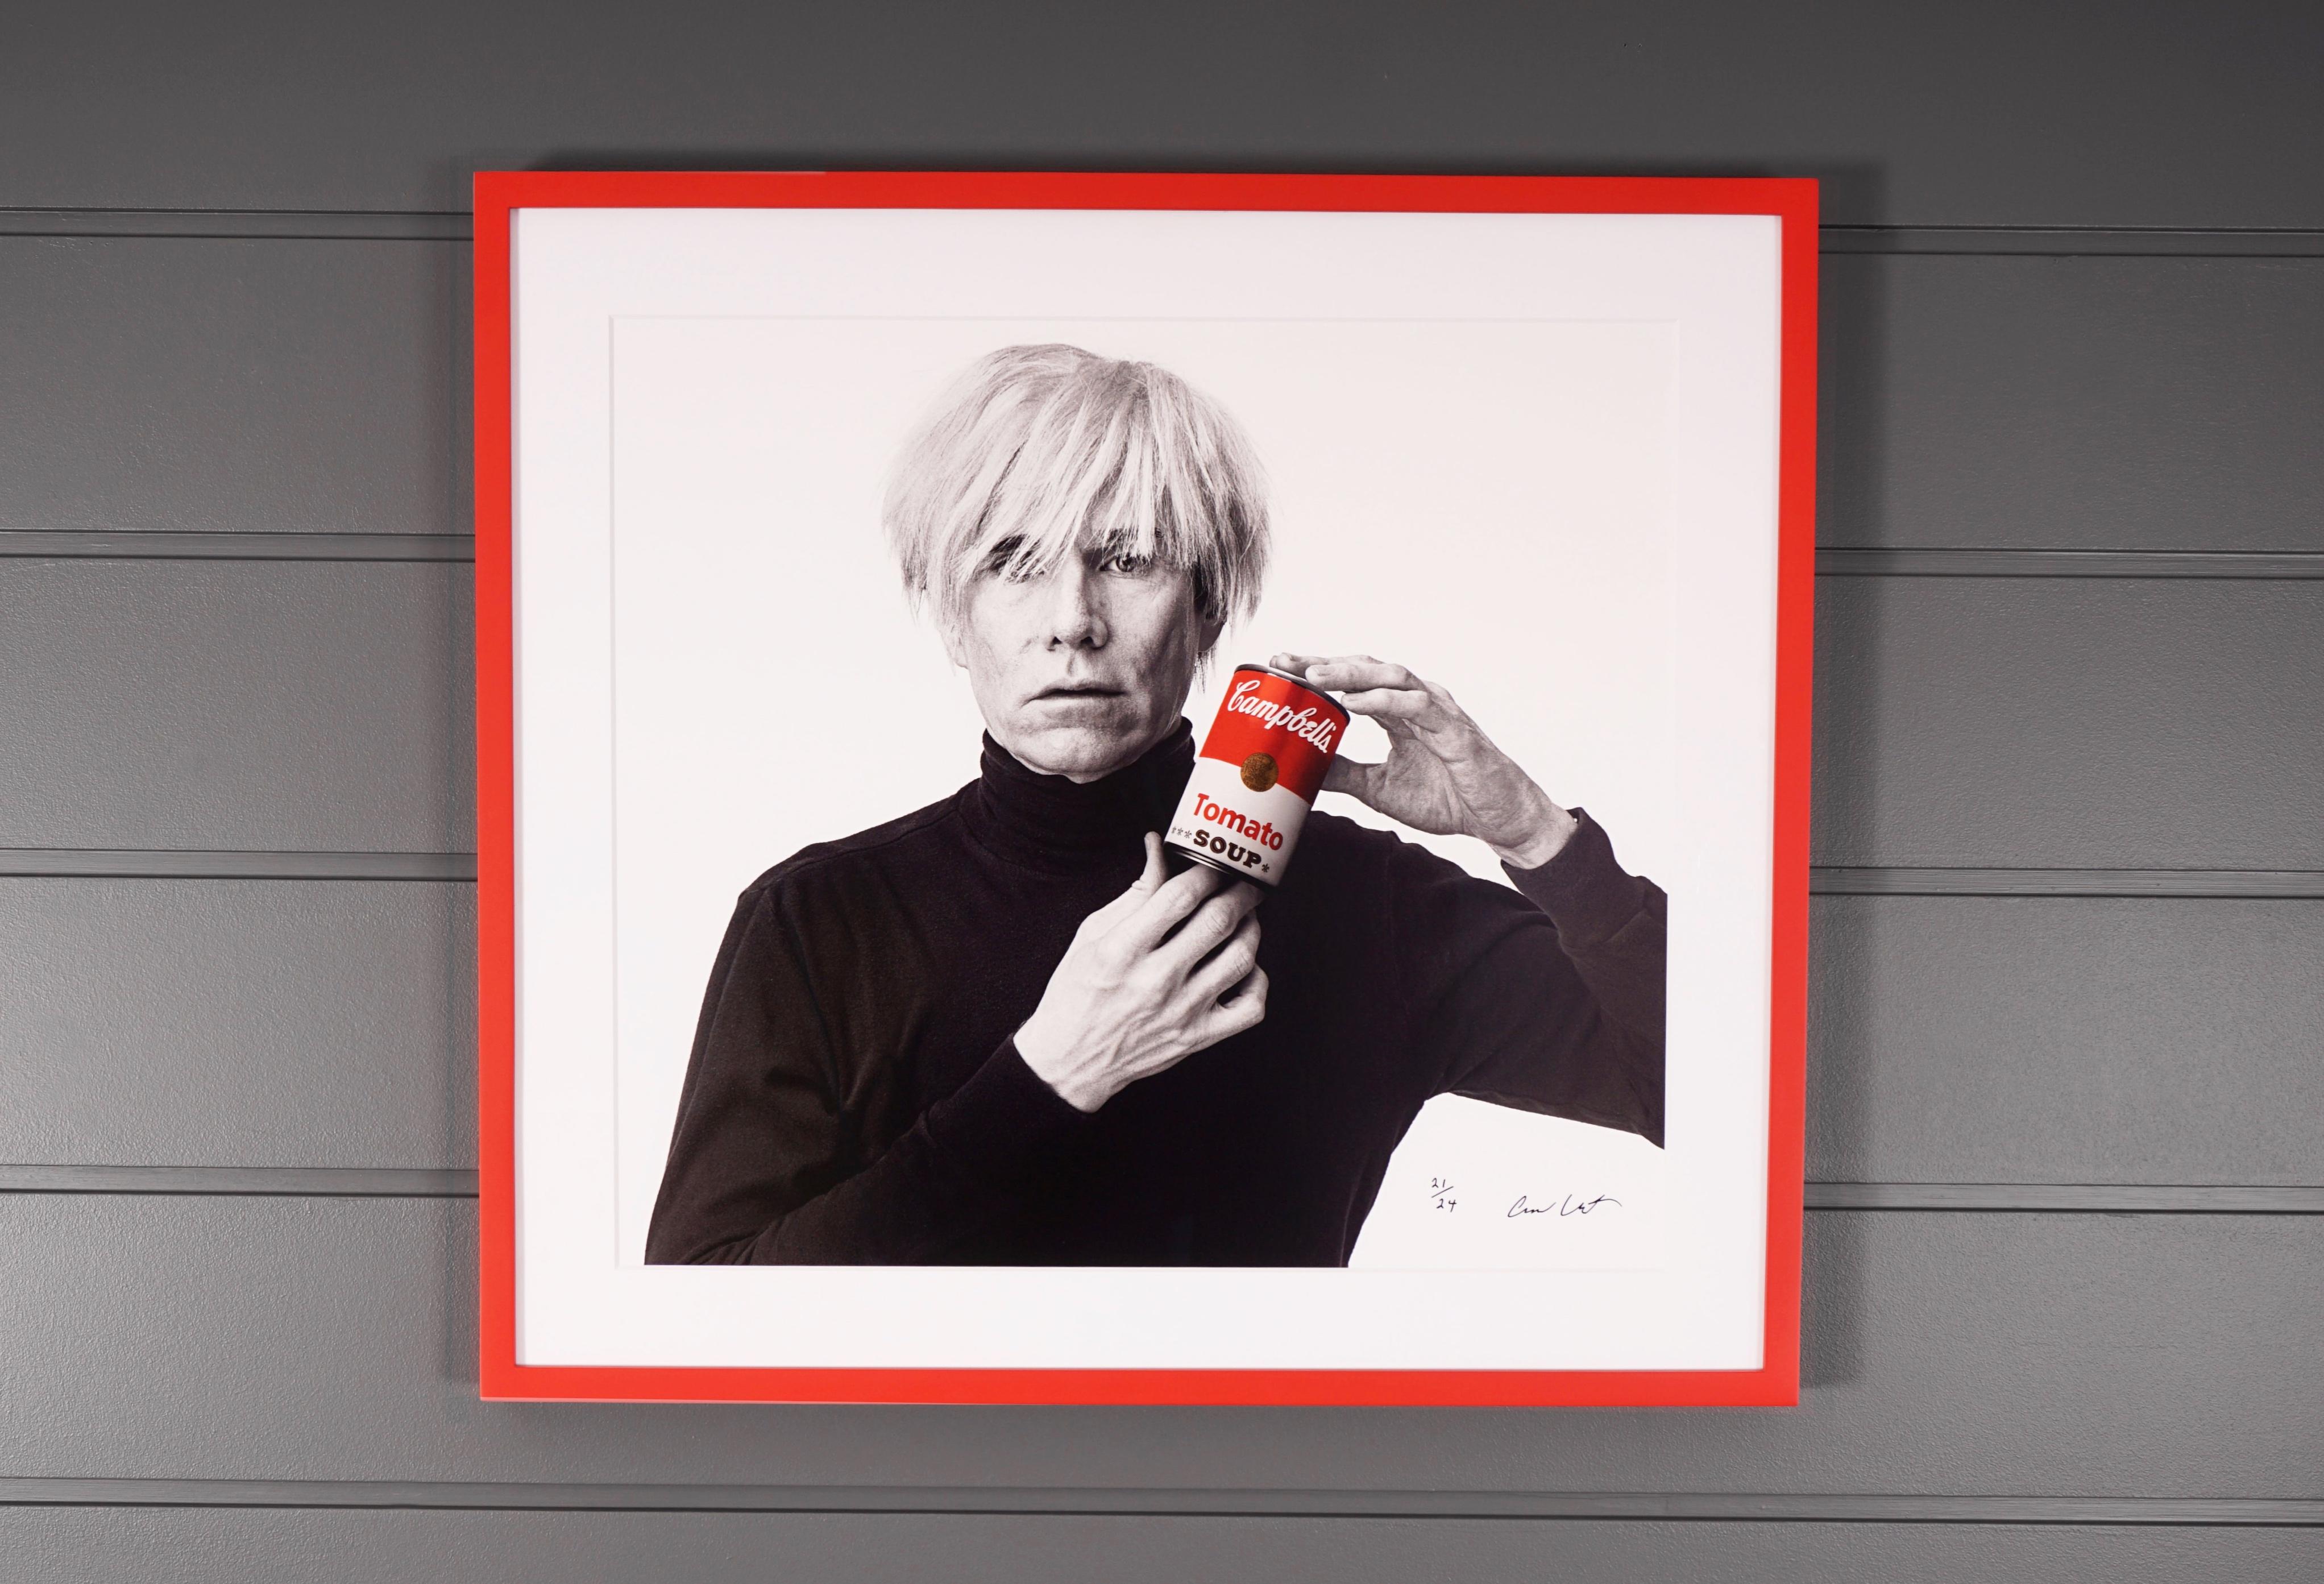 Andrew Unangst, Andy Warhol with Red Campbell's Soup Can, 1985/2017 1